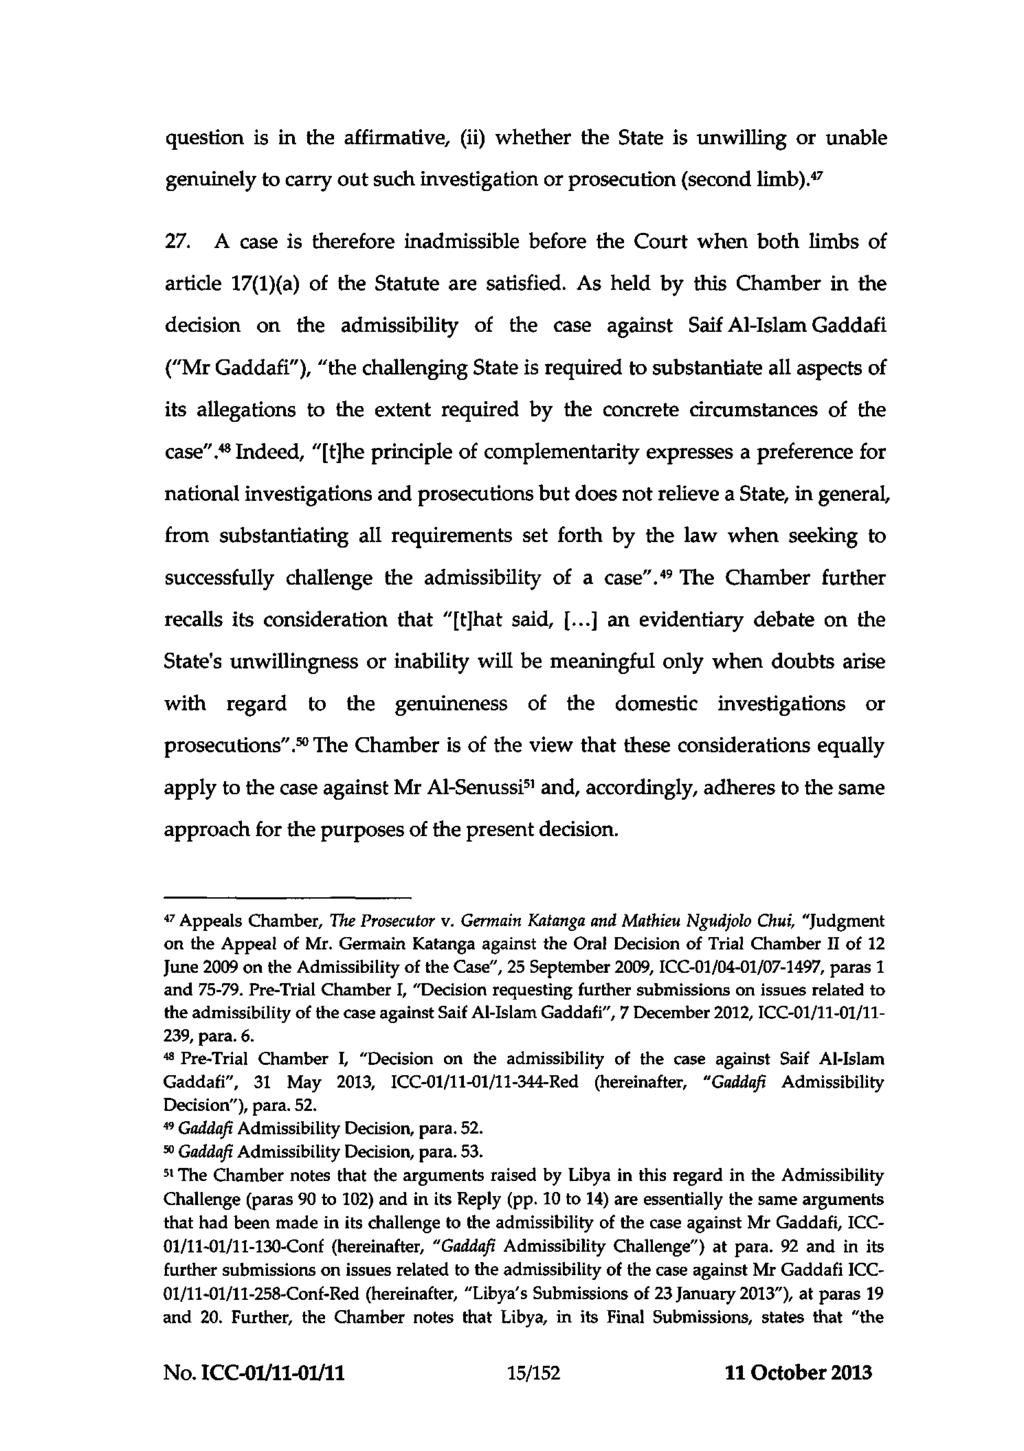 ICC-01/11-01/11-466-Red 11-10-2013 15/152 NM PT question is in the affirmative, (ii) whether the State is unwilling or unable genuinely to carry out such investigation or prosecution (second limb).